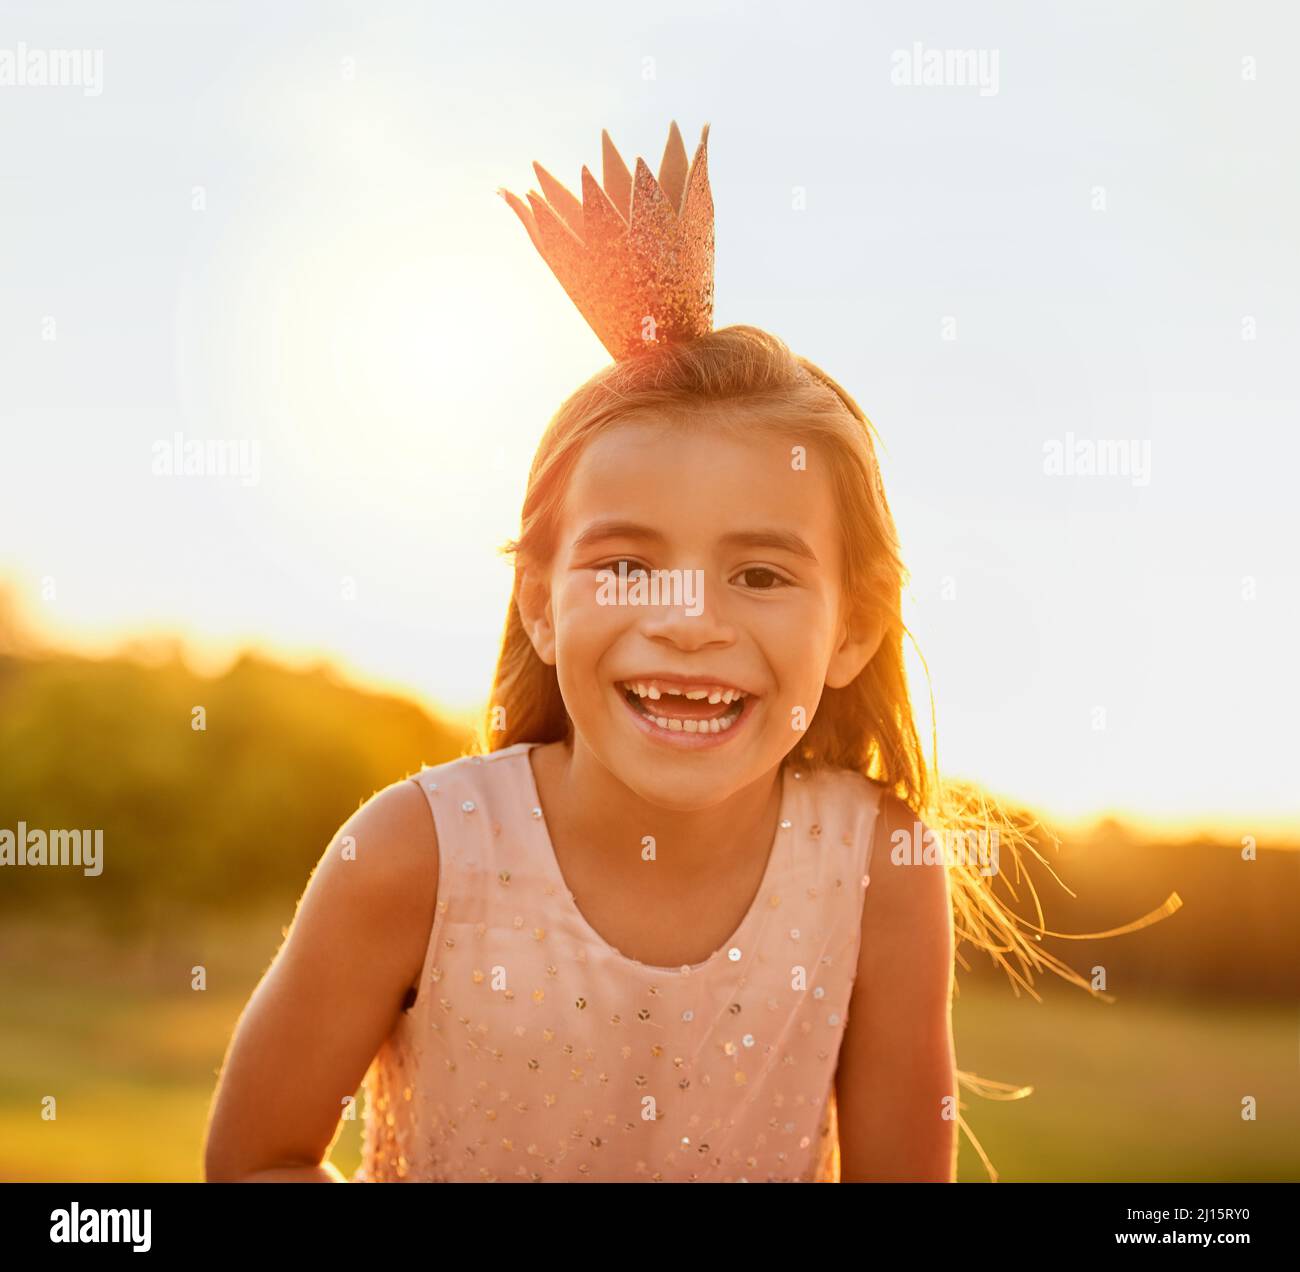 If the crown fits, there is no reason to frown. Shot of an adorable little girl playing outdoors. Stock Photo